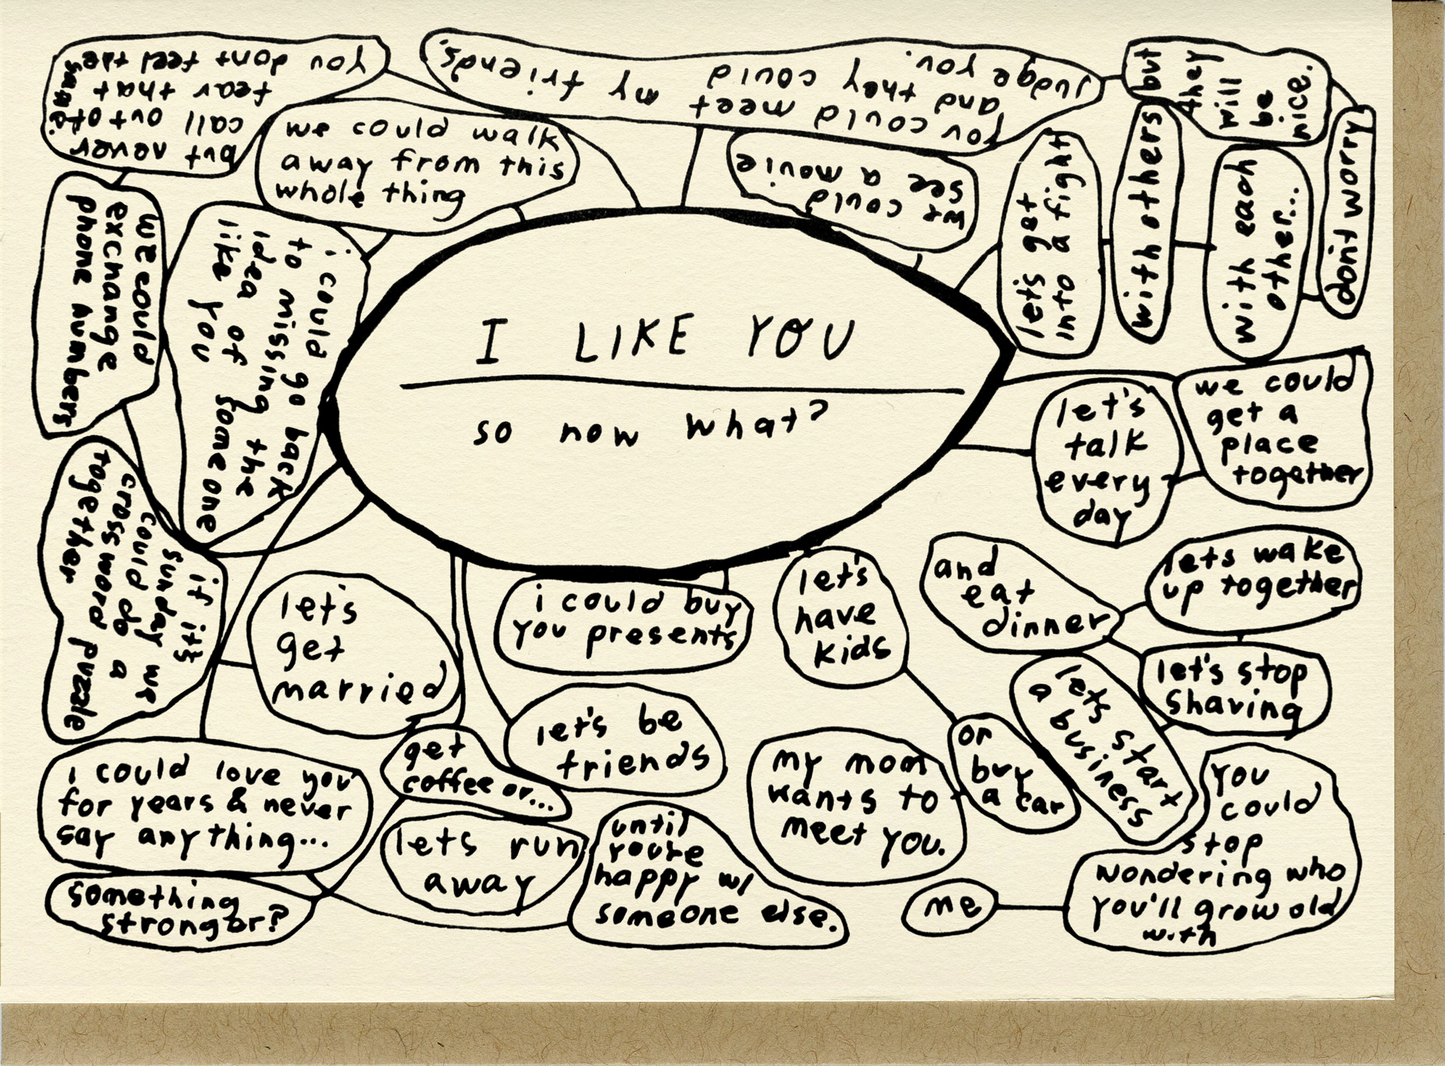 I Like You, So Now What?